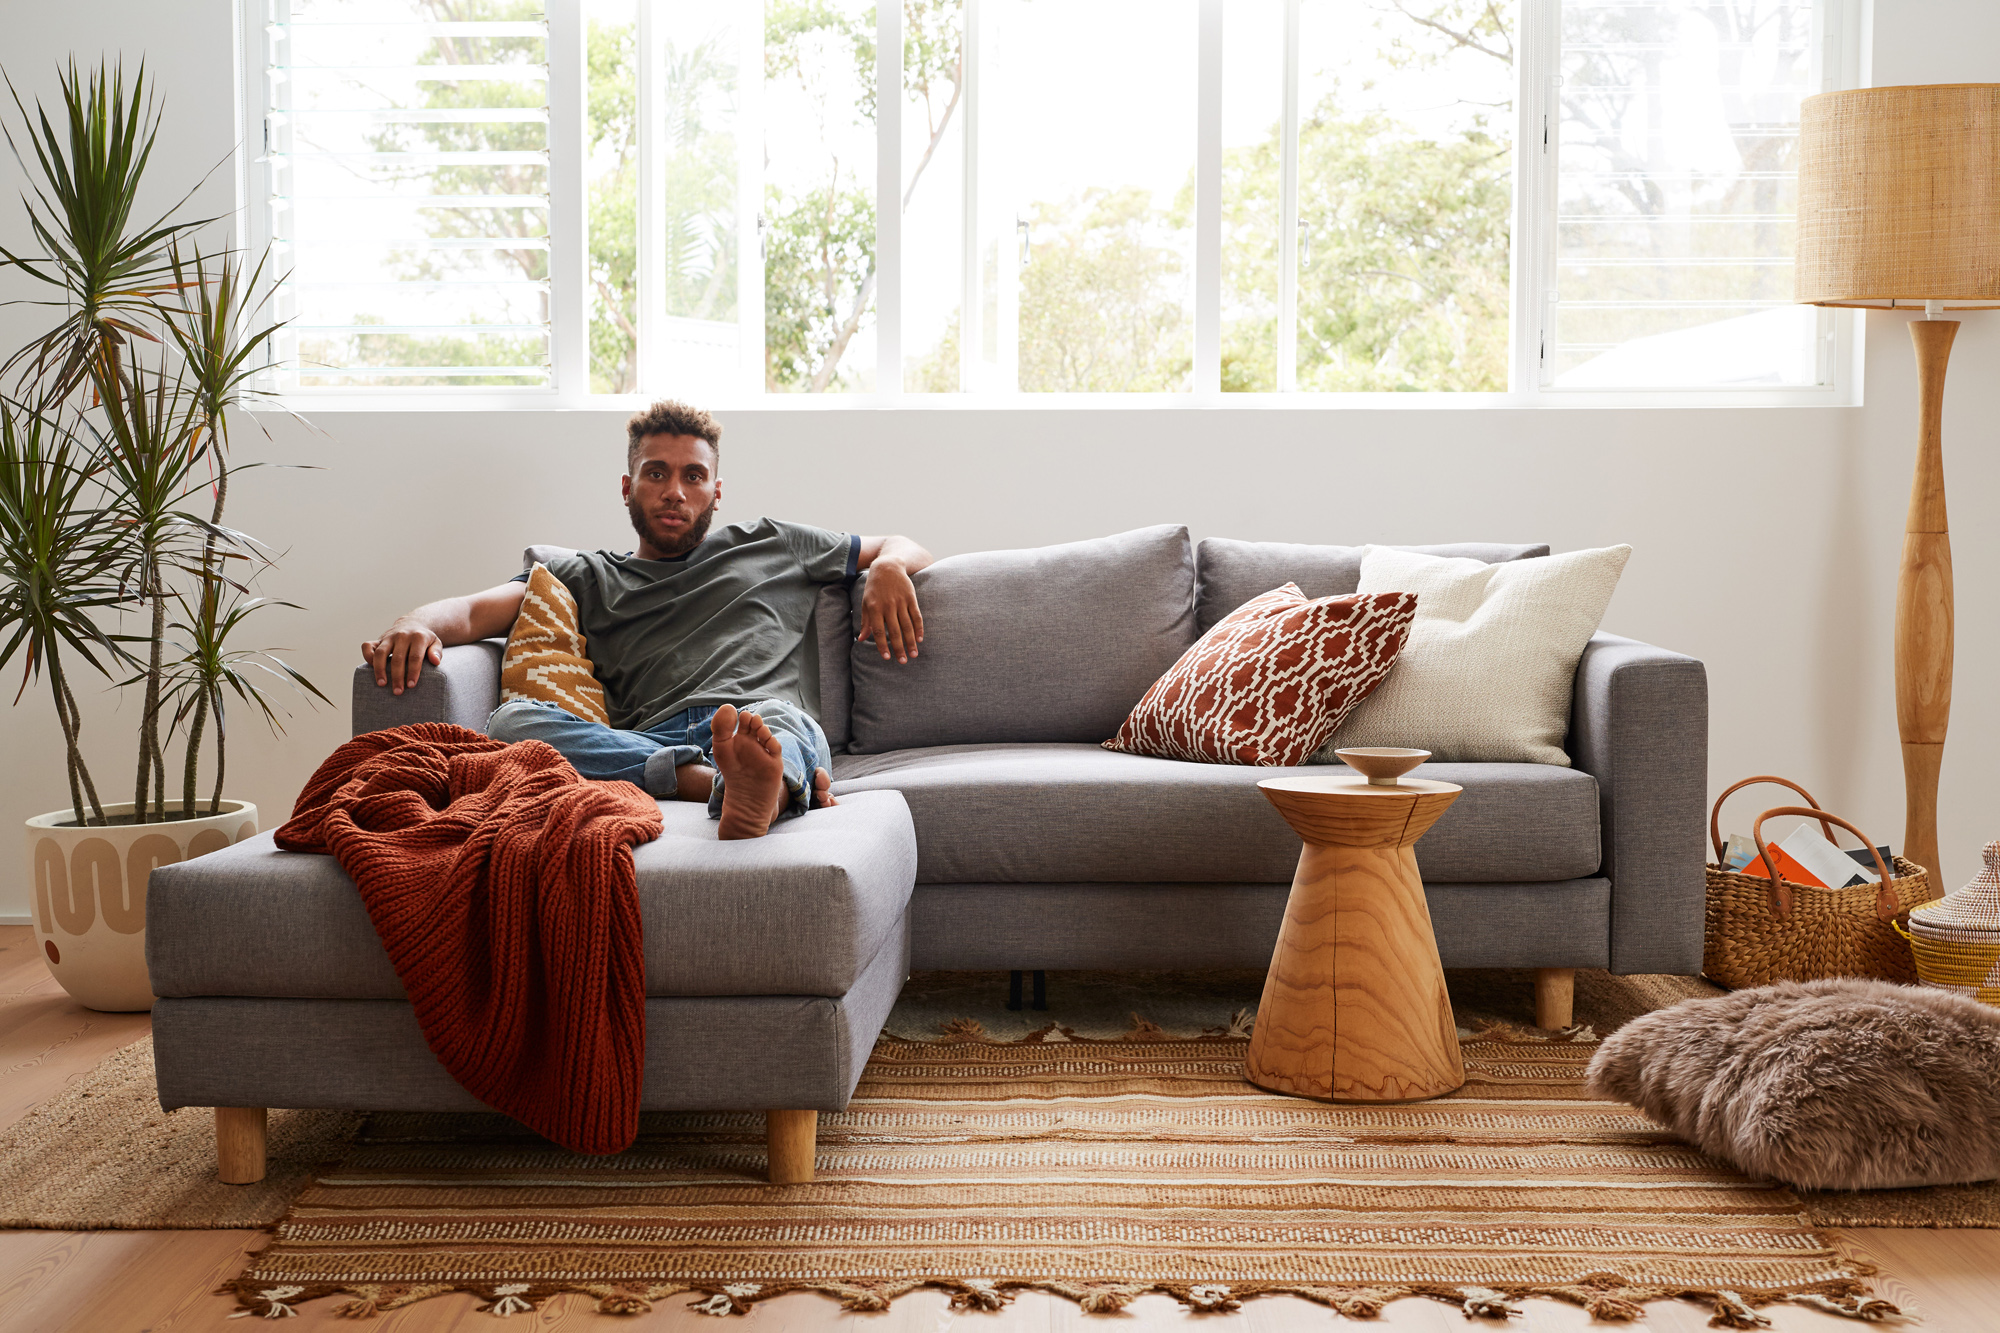 Koala Couch Review - A Modern Gay's Guide